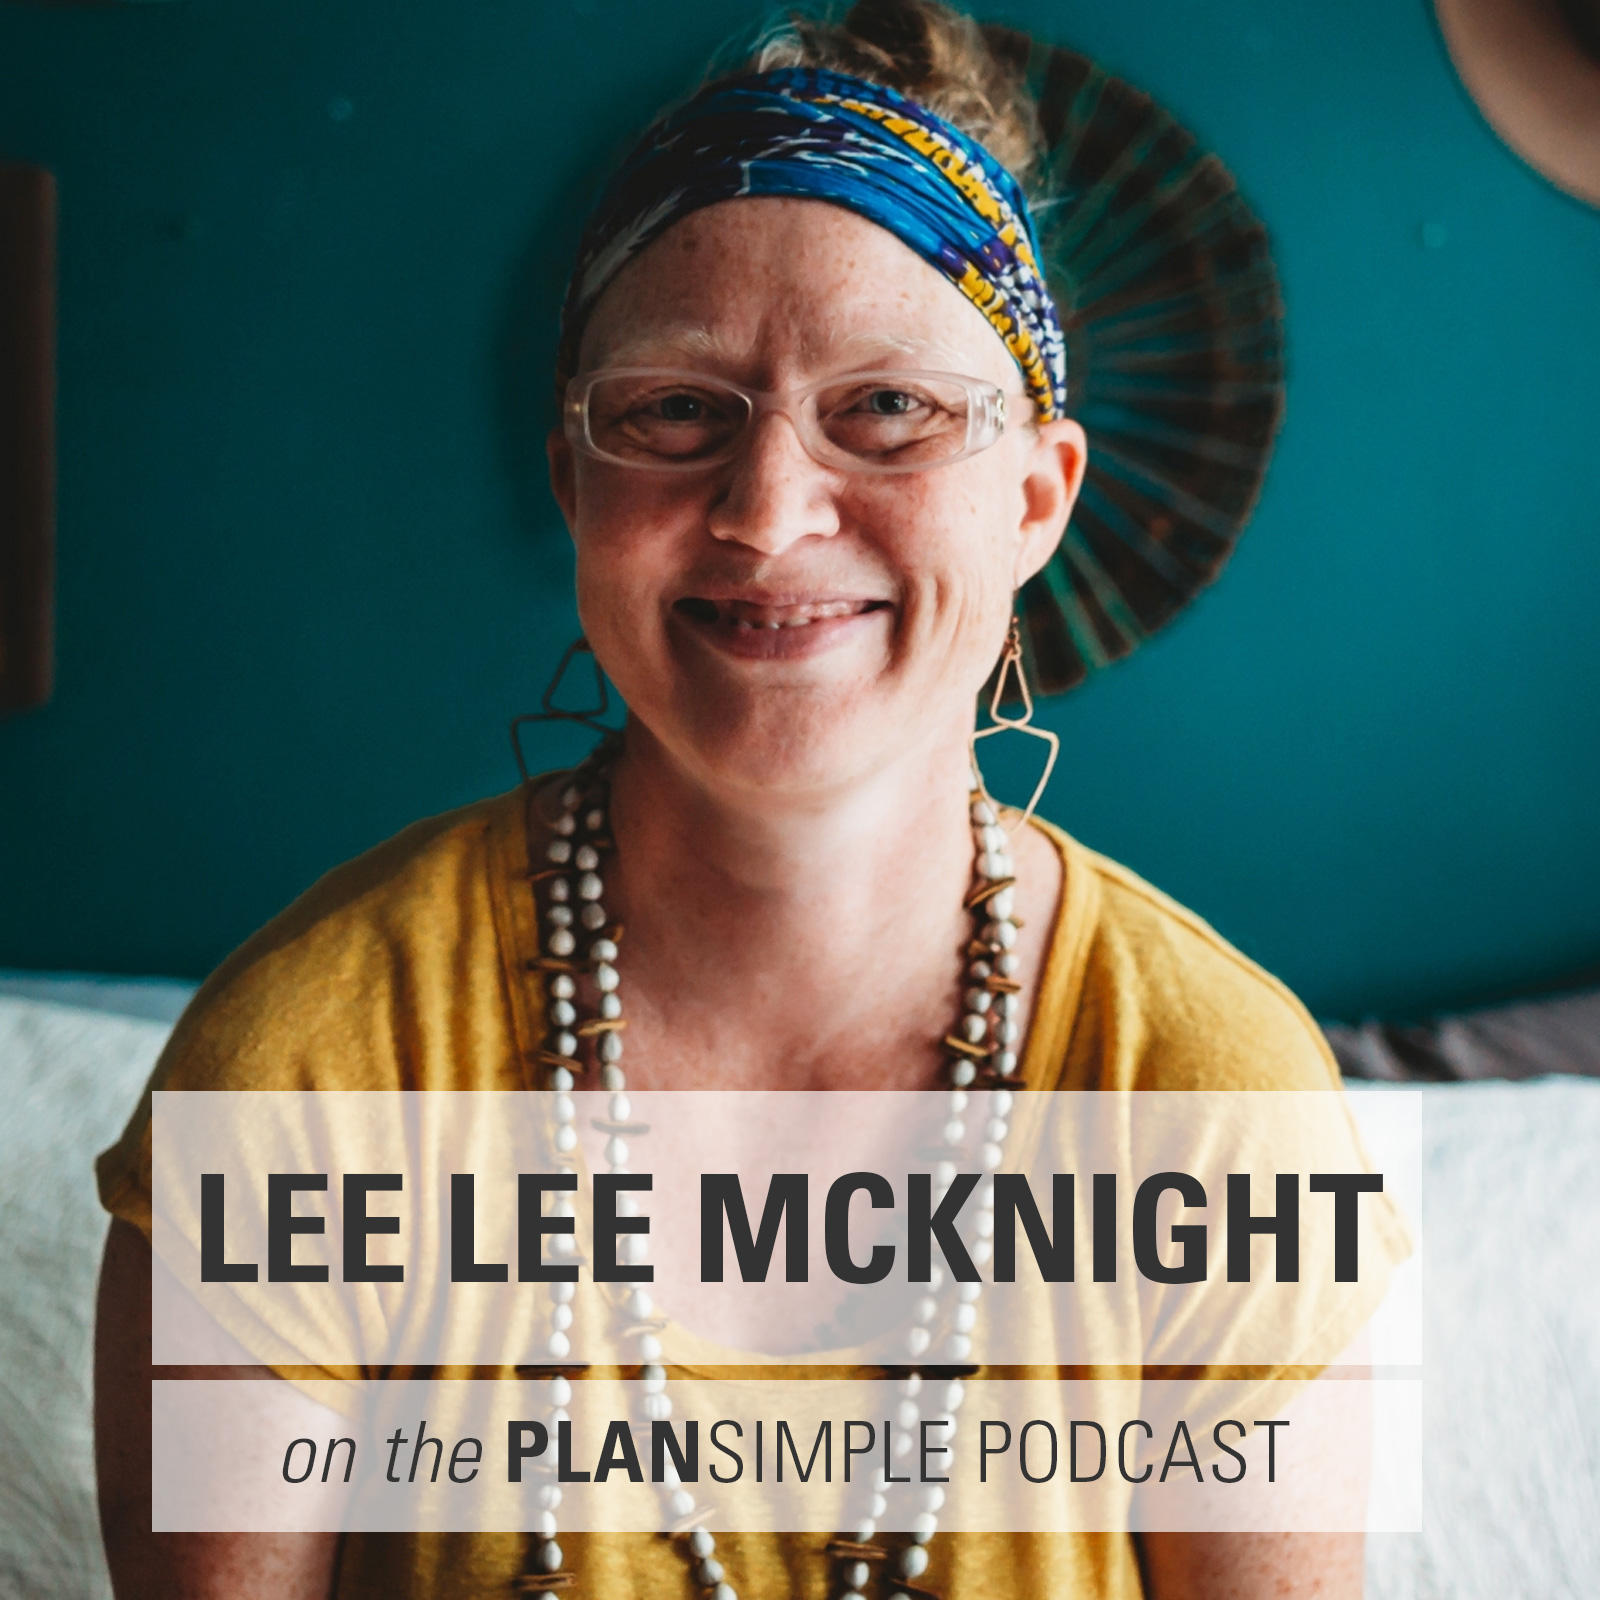 Get to Know Your Kids with Lee Lee McKnight